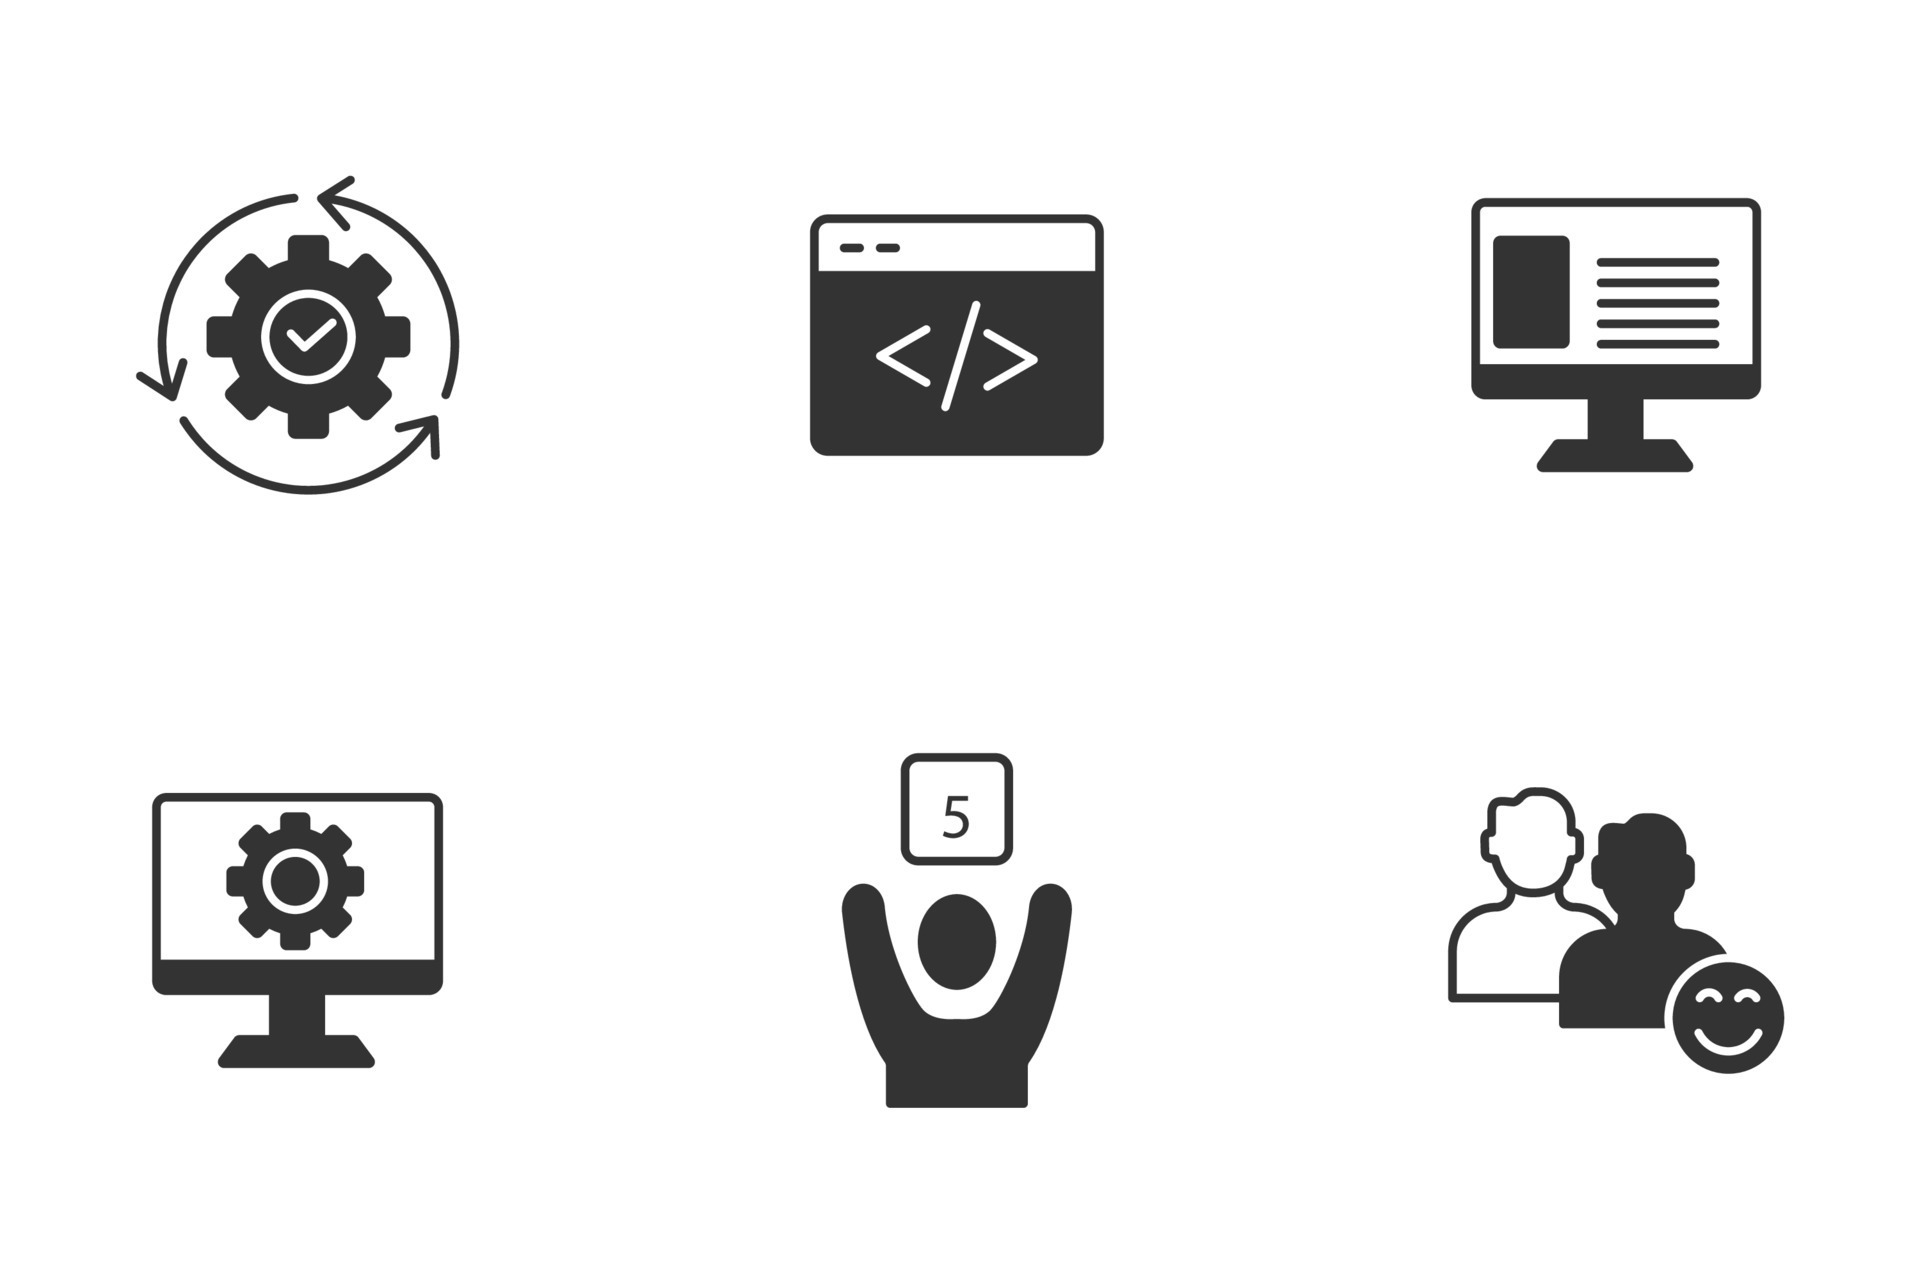 Thousands of free Vector icons and Icon Webfonts for Interfaces and  Responsive web design